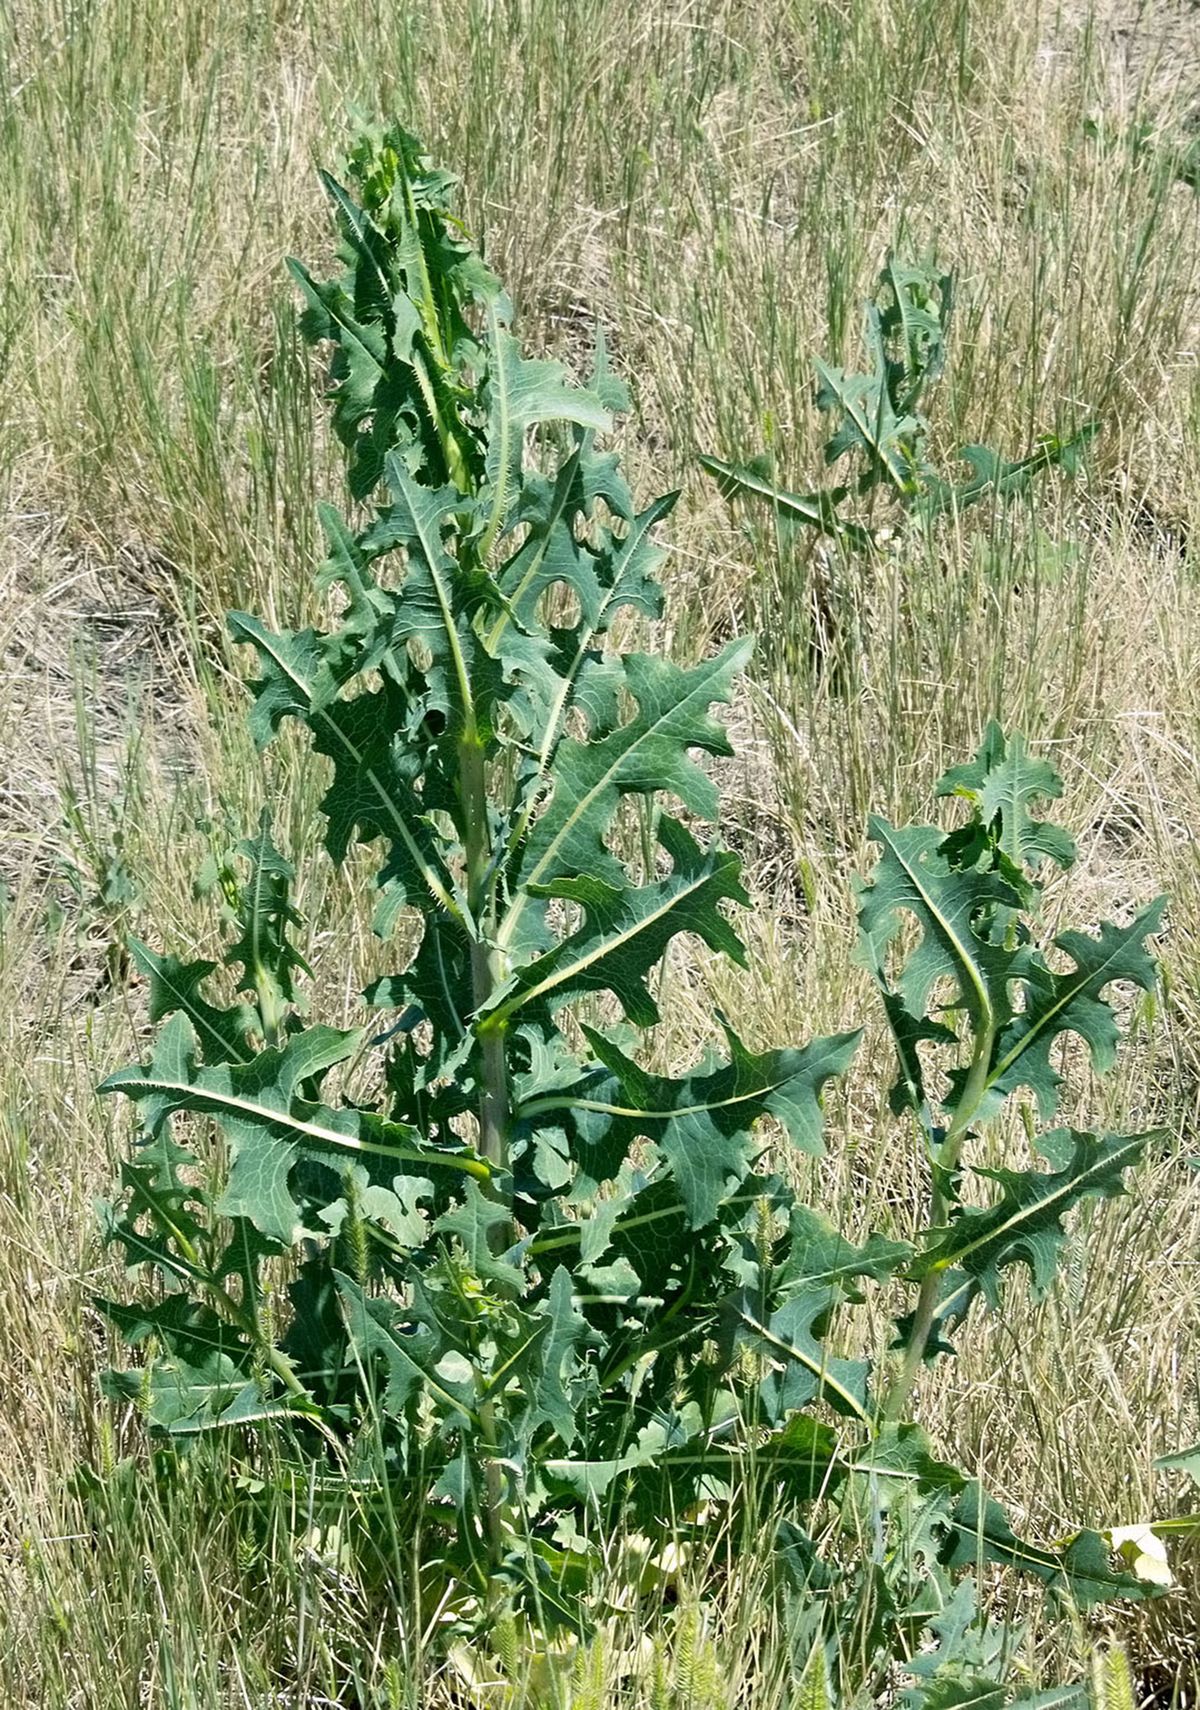 Prickly lettuce milkweed could turn Eastern Washington into new supplier of natural rubber | The Spokesman-Review